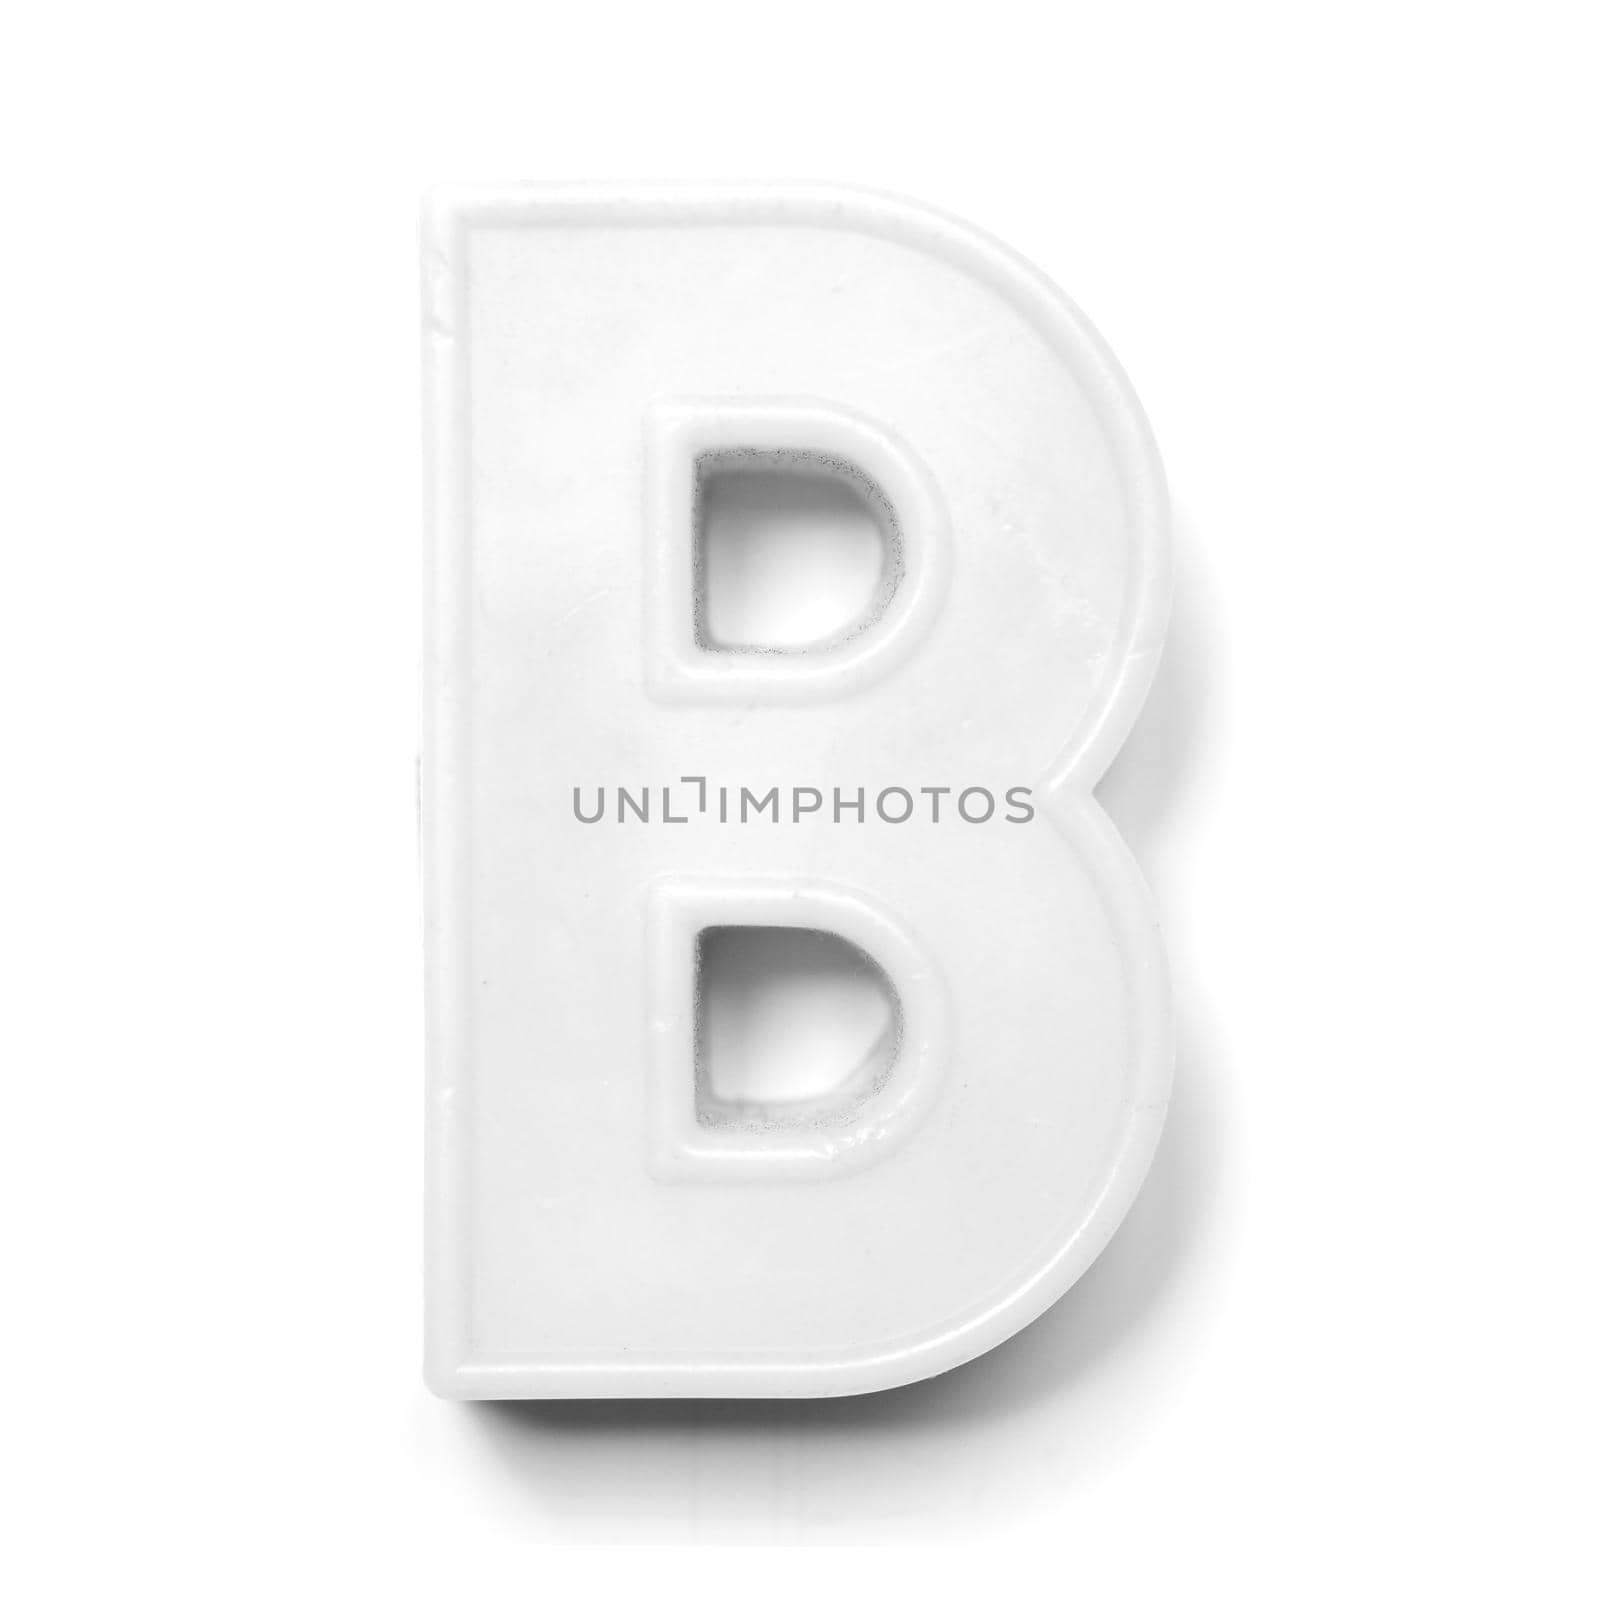 Magnetic uppercase letter B of the British alphabet in black and white